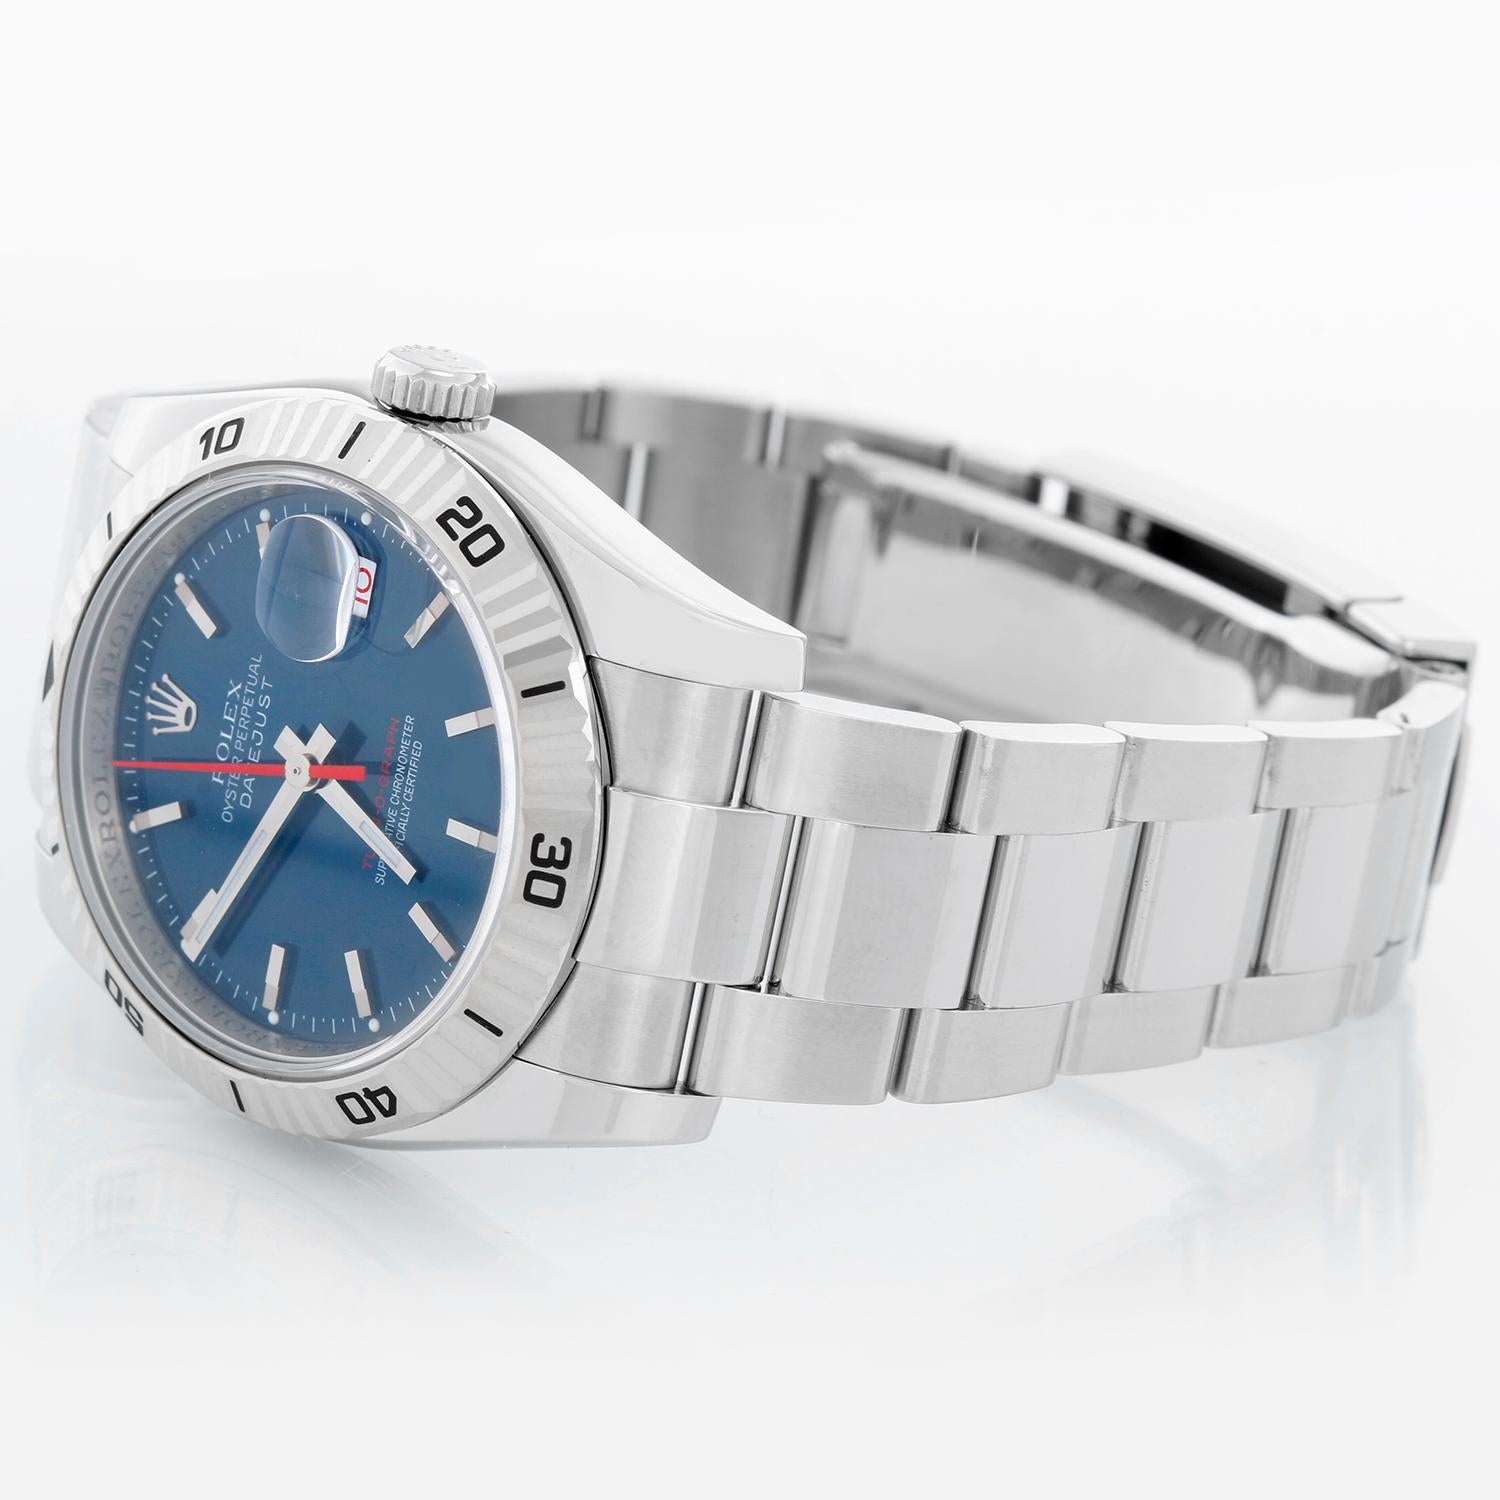 Men's Rolex Turnograph Datejust Stainless Steel Watch 116264 - Automatic winding, 31 jewel, sapphire crystal. Stainless steel case with 18k white gold Thunderbird bezel  (36mm diameter). Blue dial with stick markers; red date and second hand.